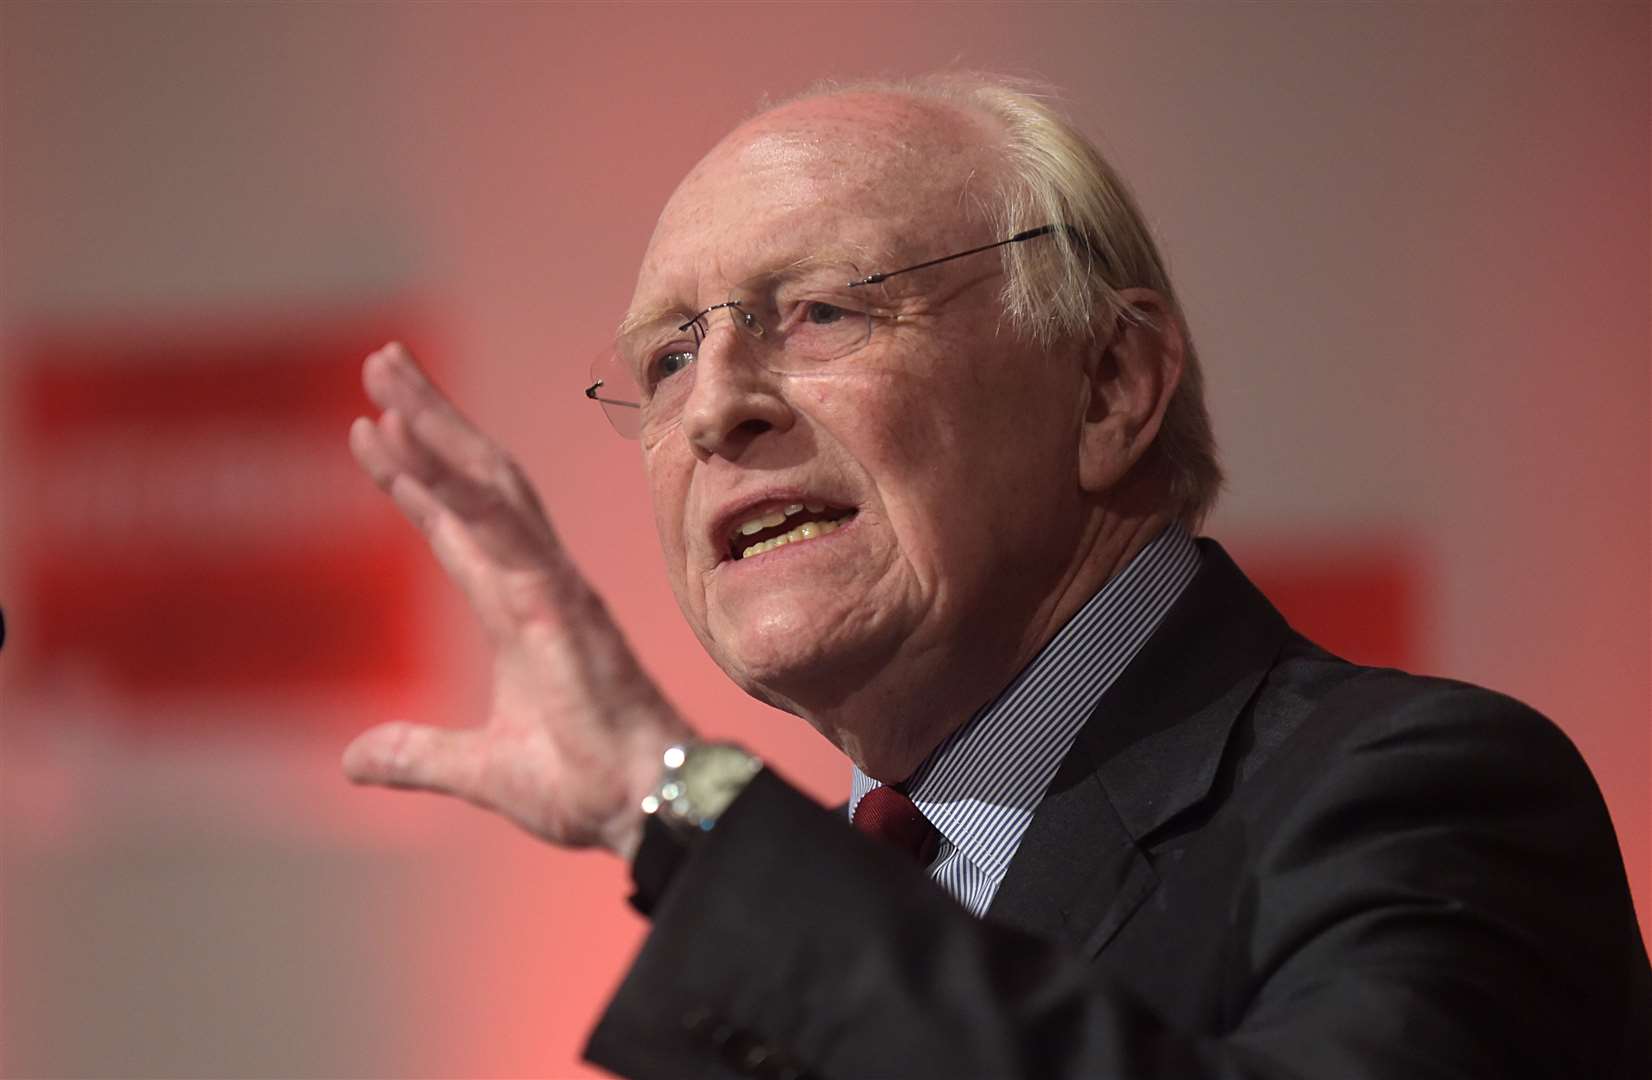 He admitted copying part of former Labour leader Neil Kinnock’s speech (Jane Barlow/PA)